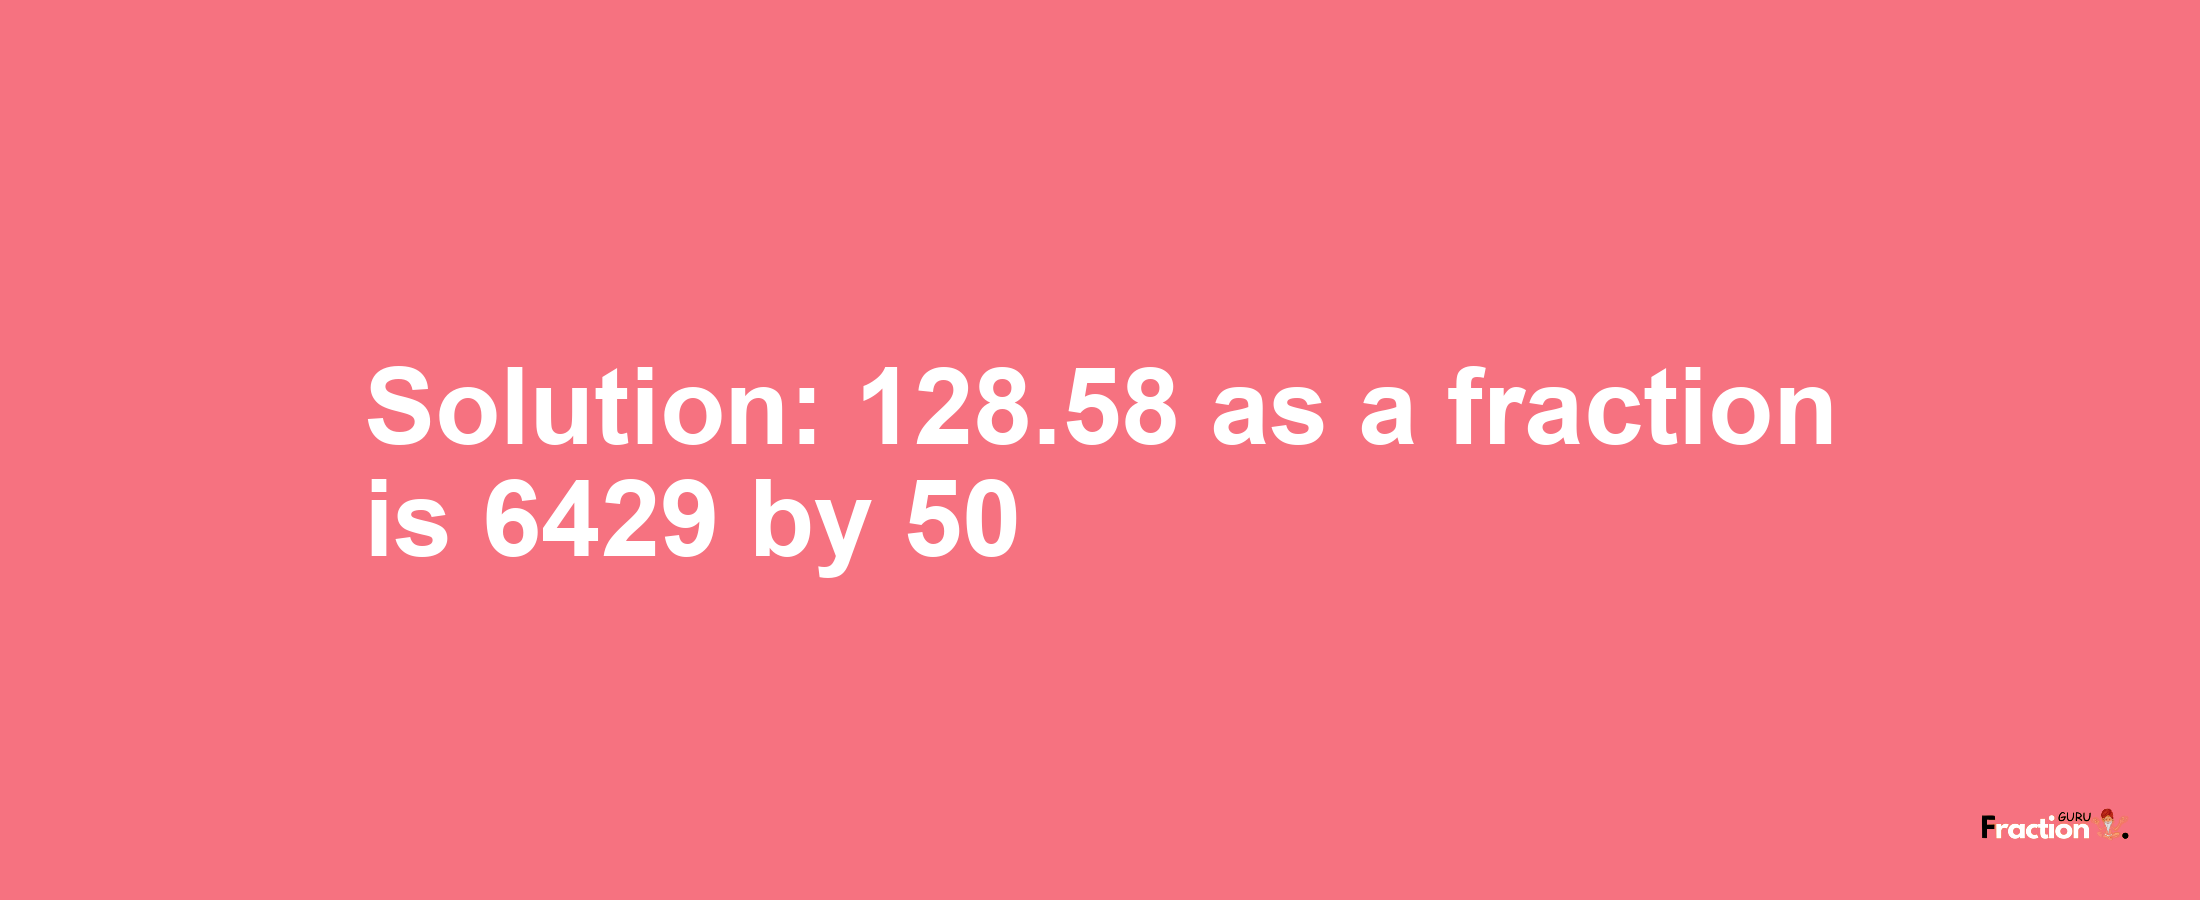 Solution:128.58 as a fraction is 6429/50